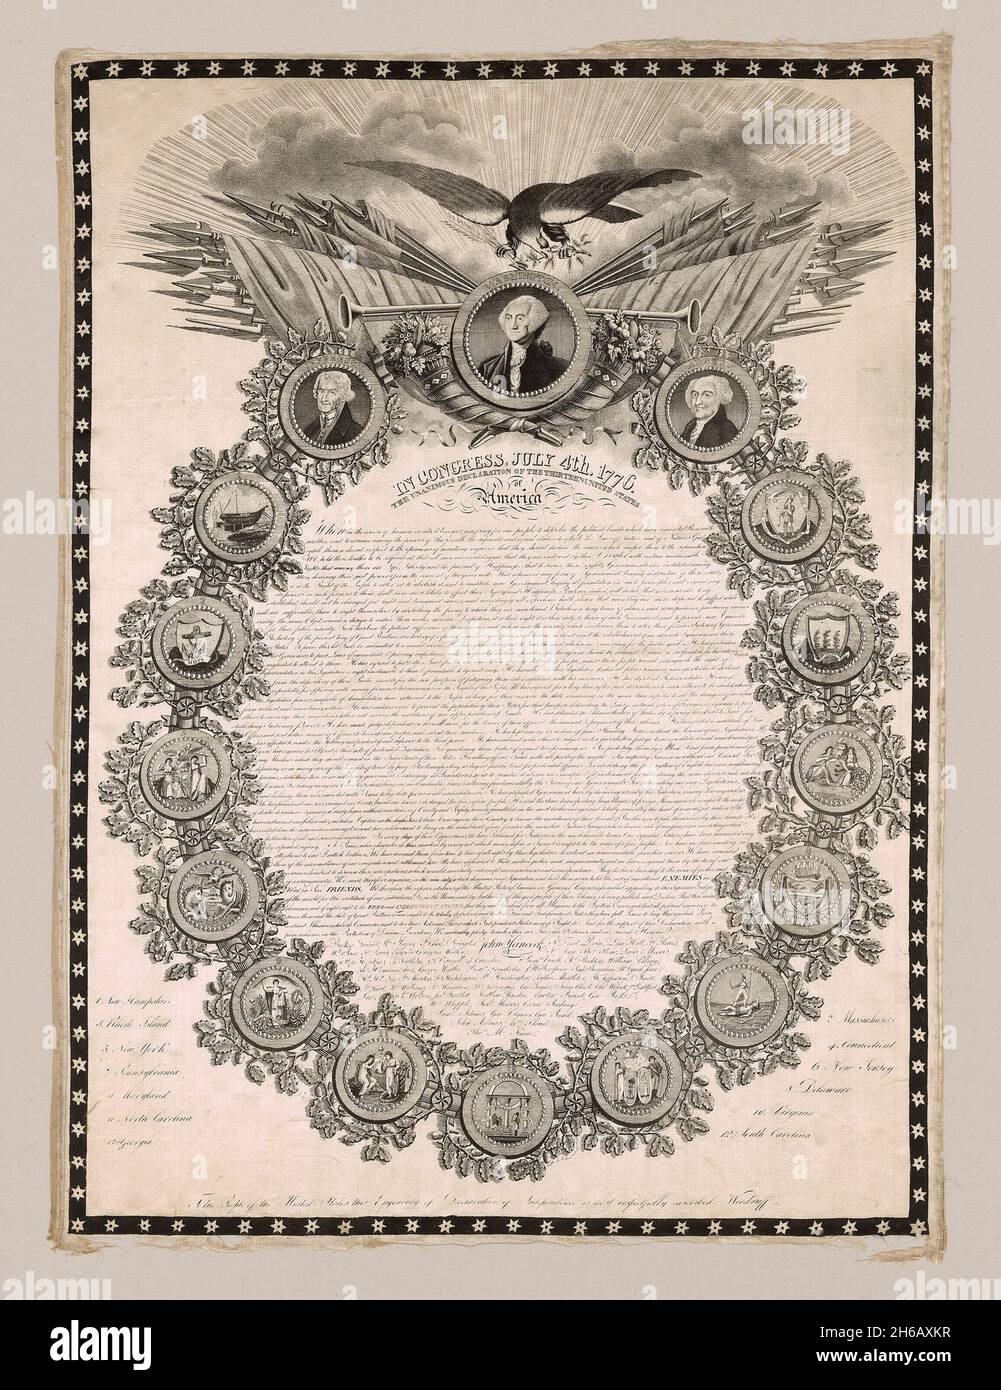 Panel (Furnishing Fabric), Lyon, 1820. 'In Congress, July 4th 1776, The Unanimous Declaration of the Thirteen United States of America', text of the US Declaration of Independence with portraits of presidents and crests of the 13 states. Manufactured by H. Brunet et Cie. Stock Photo